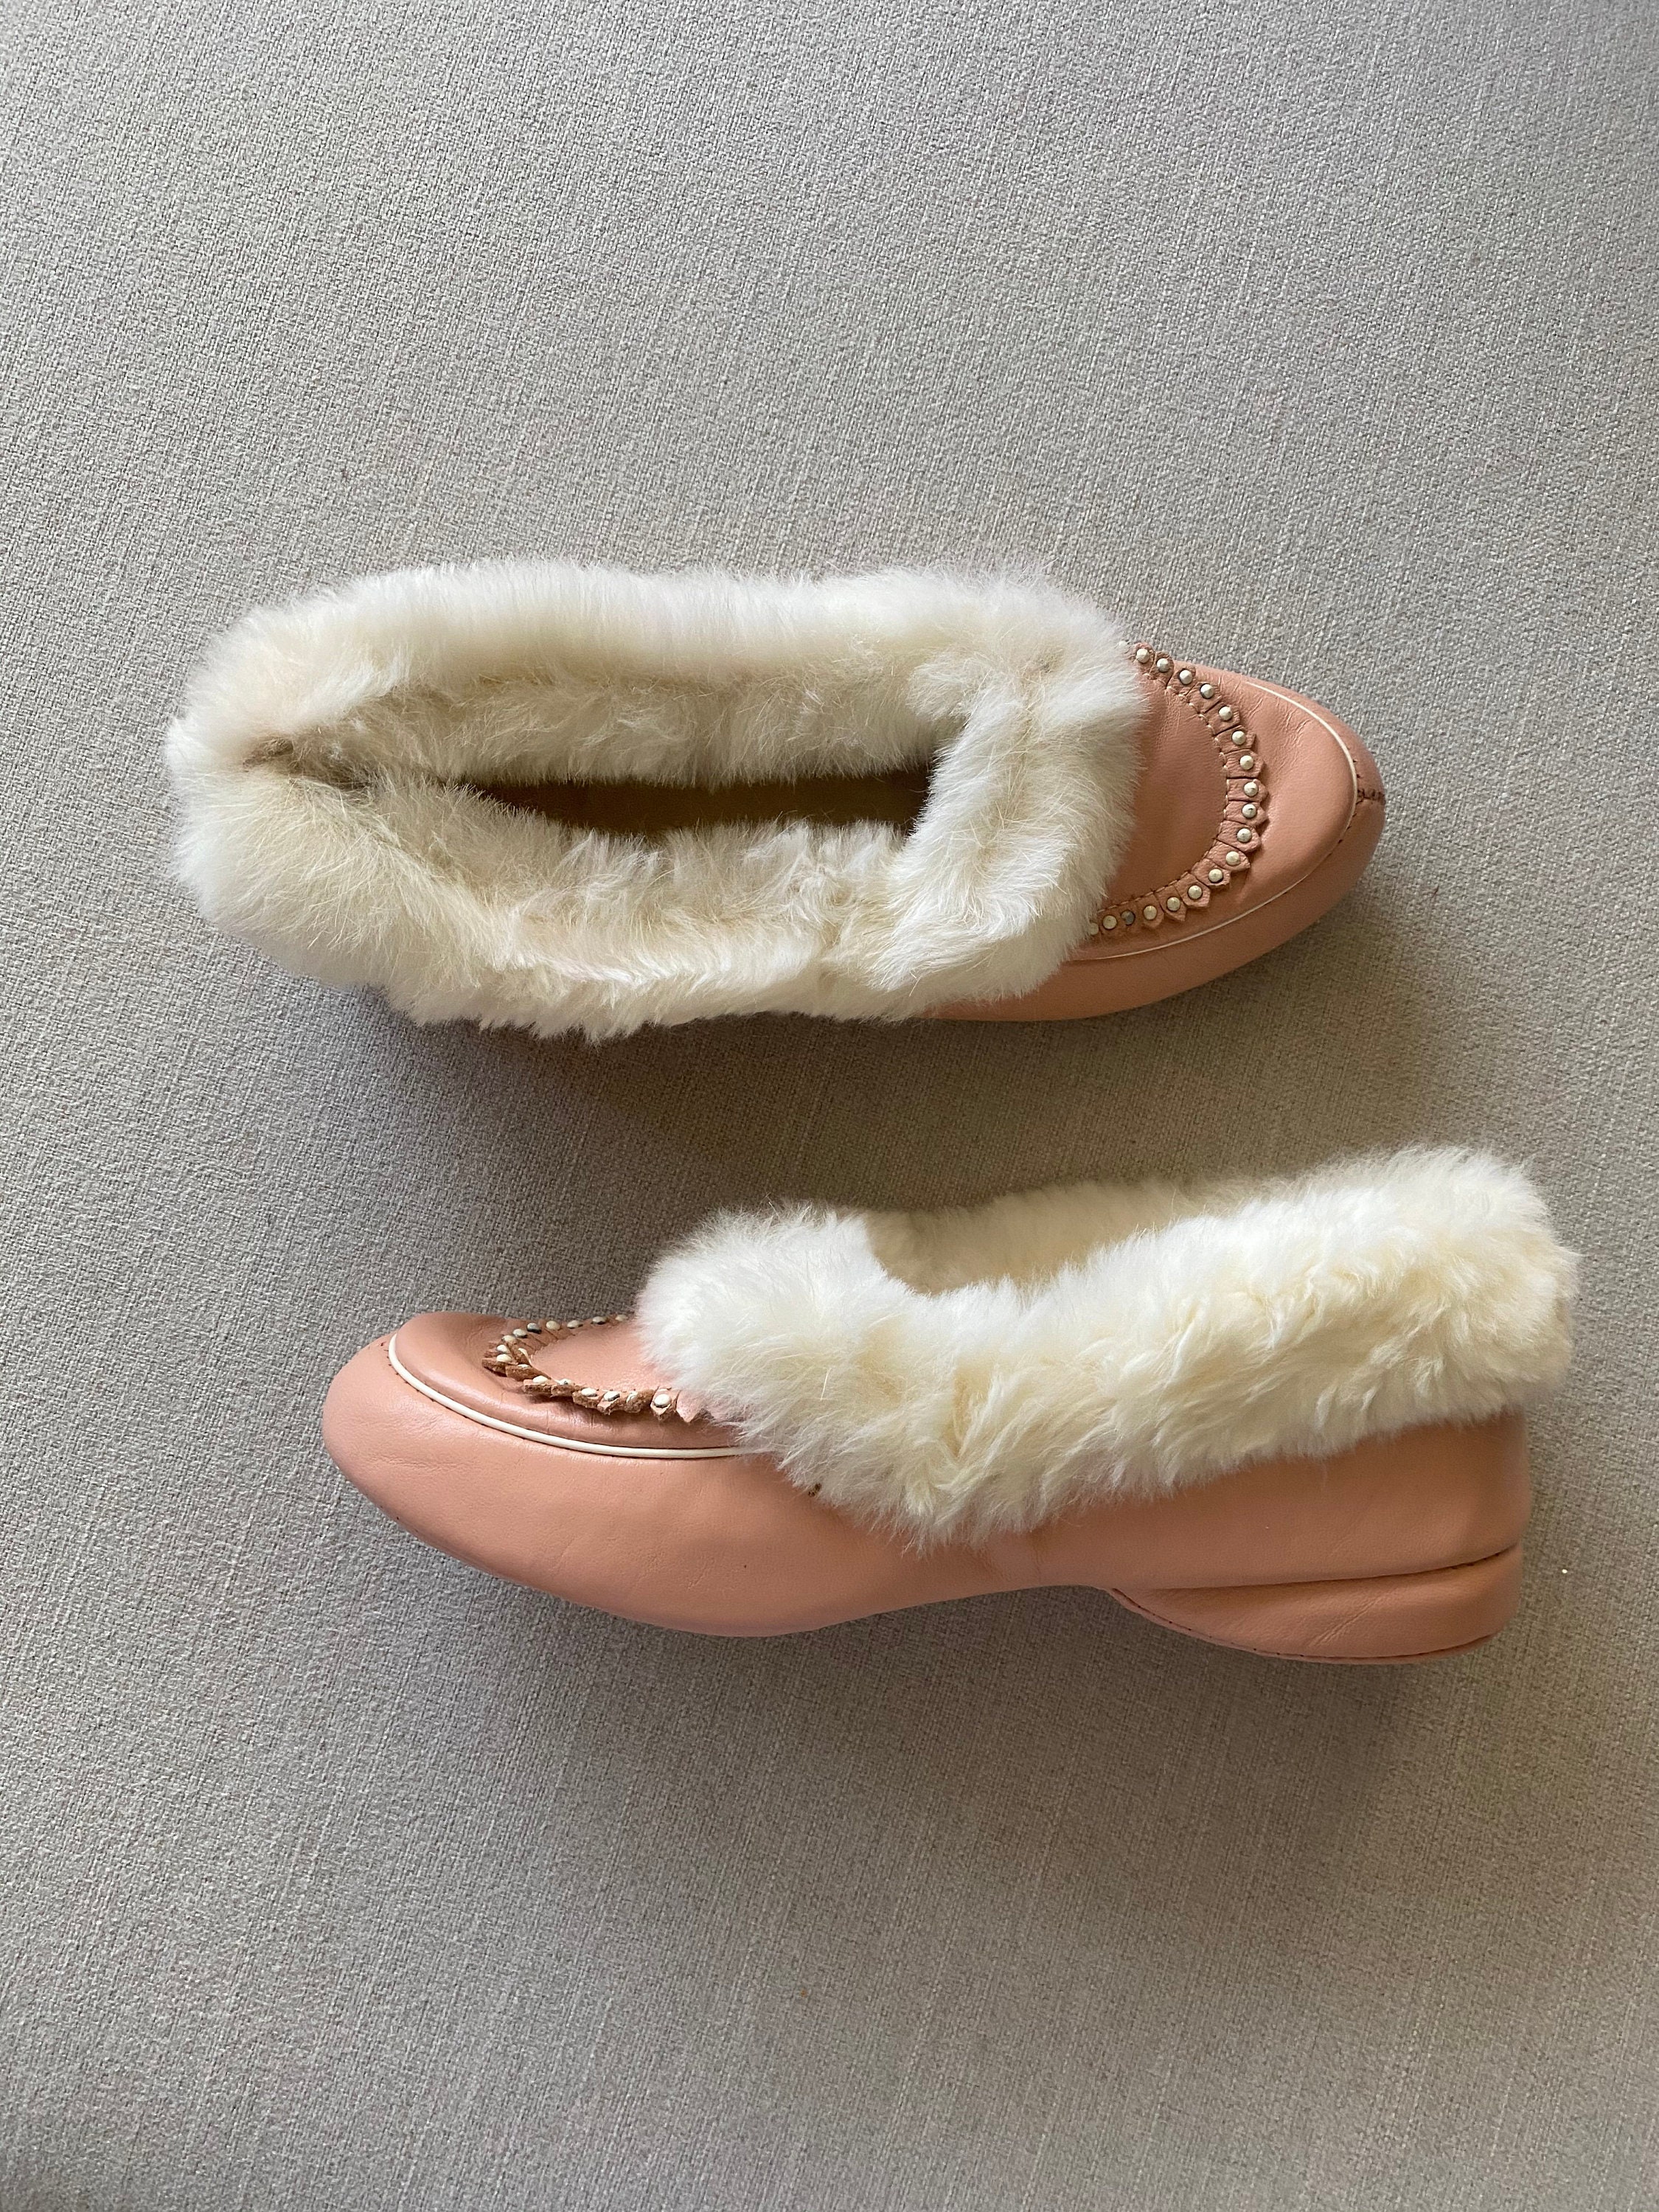 Vintage 1960'S Pink Leather Moccasins With White Rabbit | Etsy